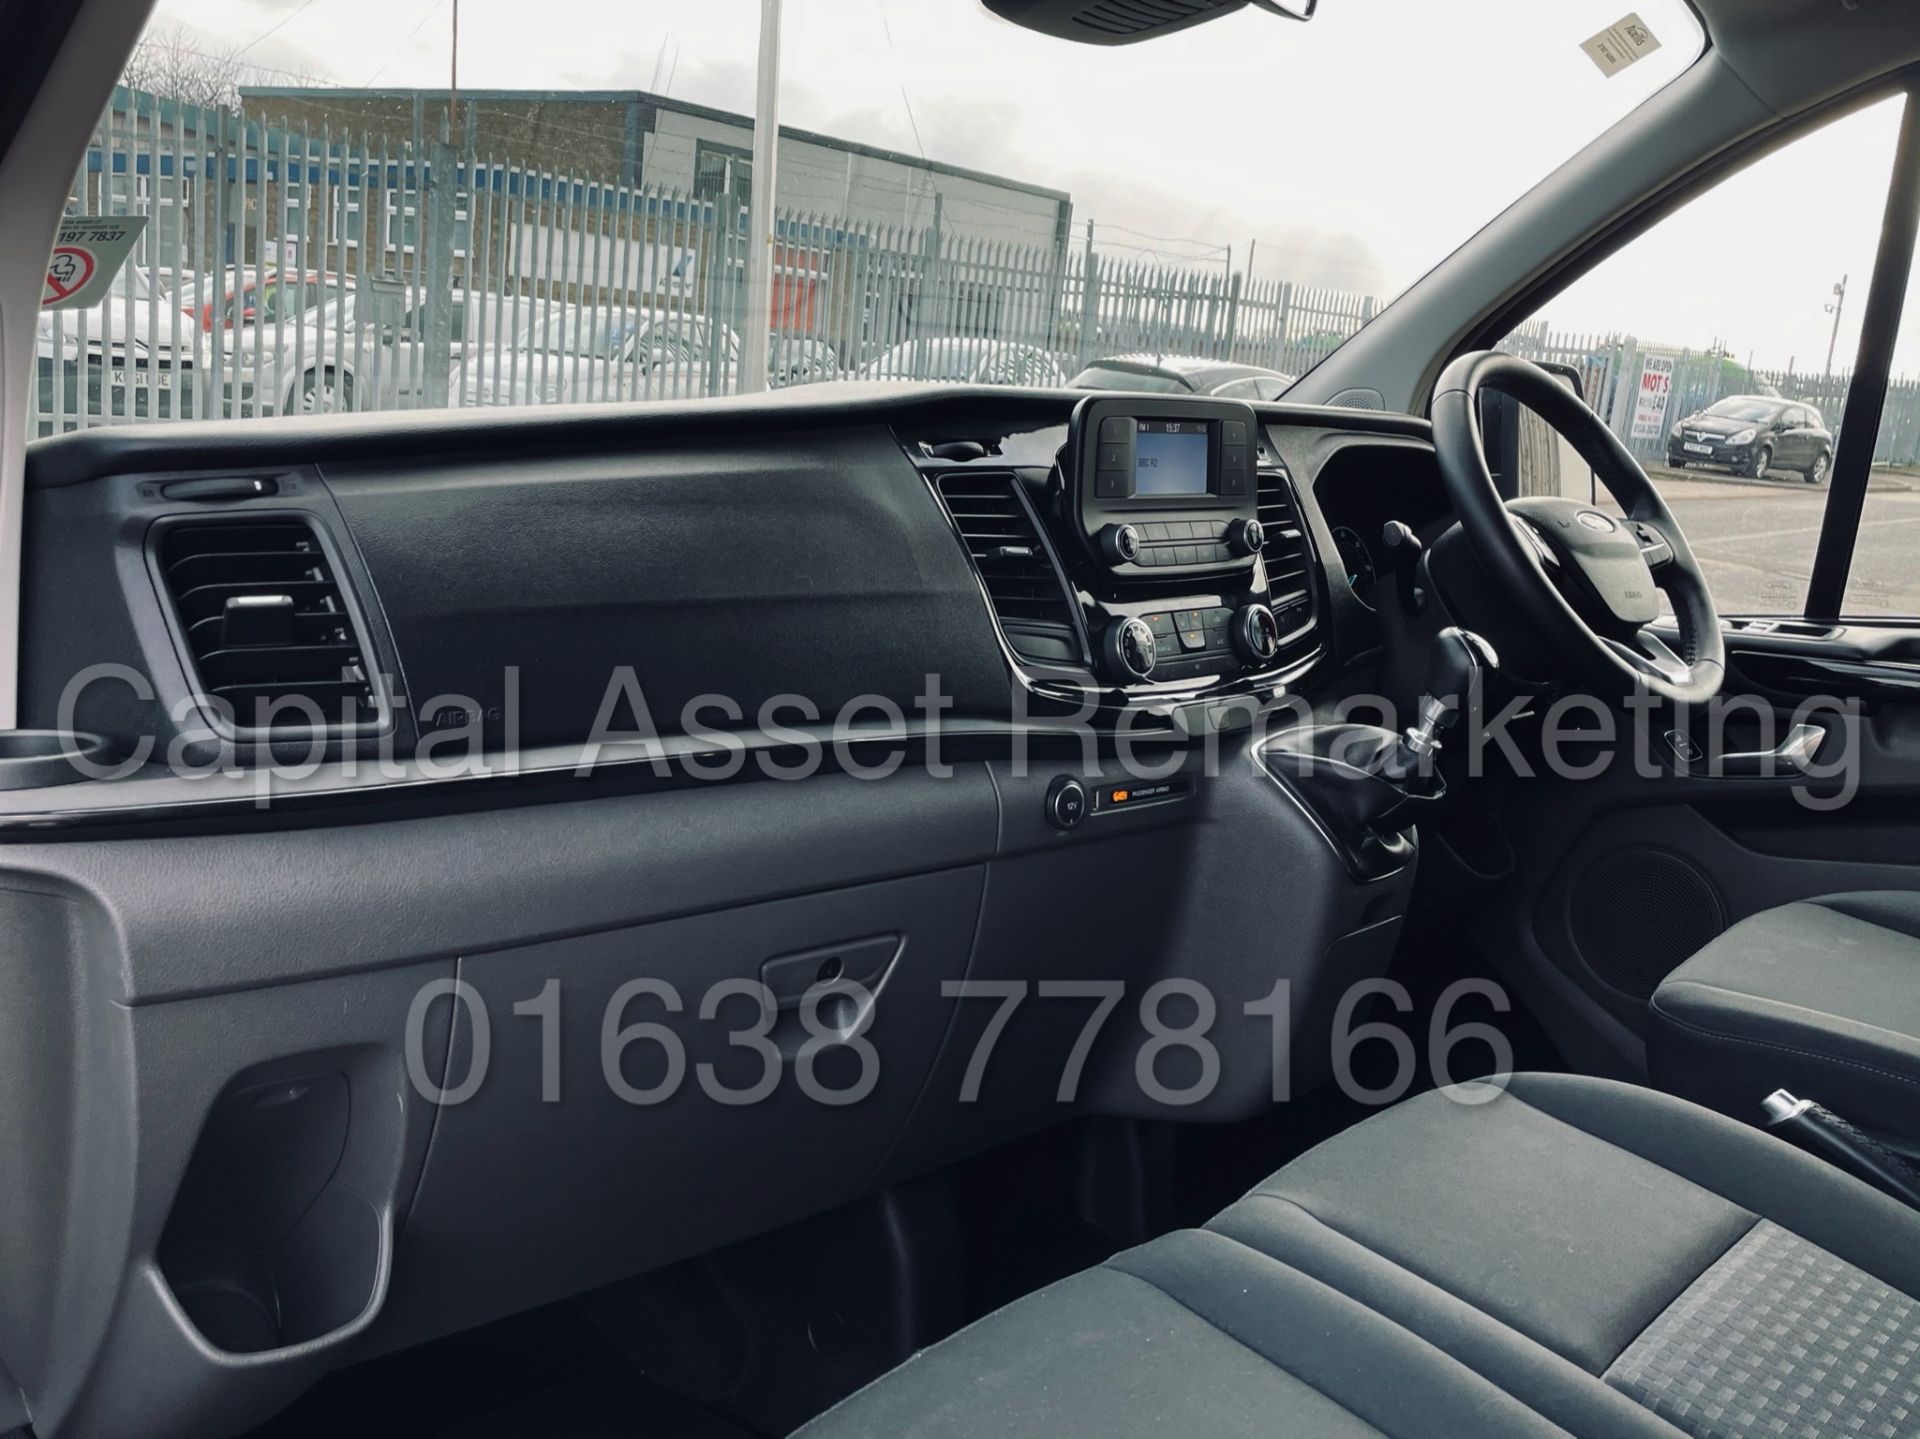 (On Sale) FORD TRANSIT CUSTOM TOURNEO *9 SEATER MPV / BUS* (2019) '2.0 TDCI - 130 BHP' (1 OWNER) - Image 17 of 46